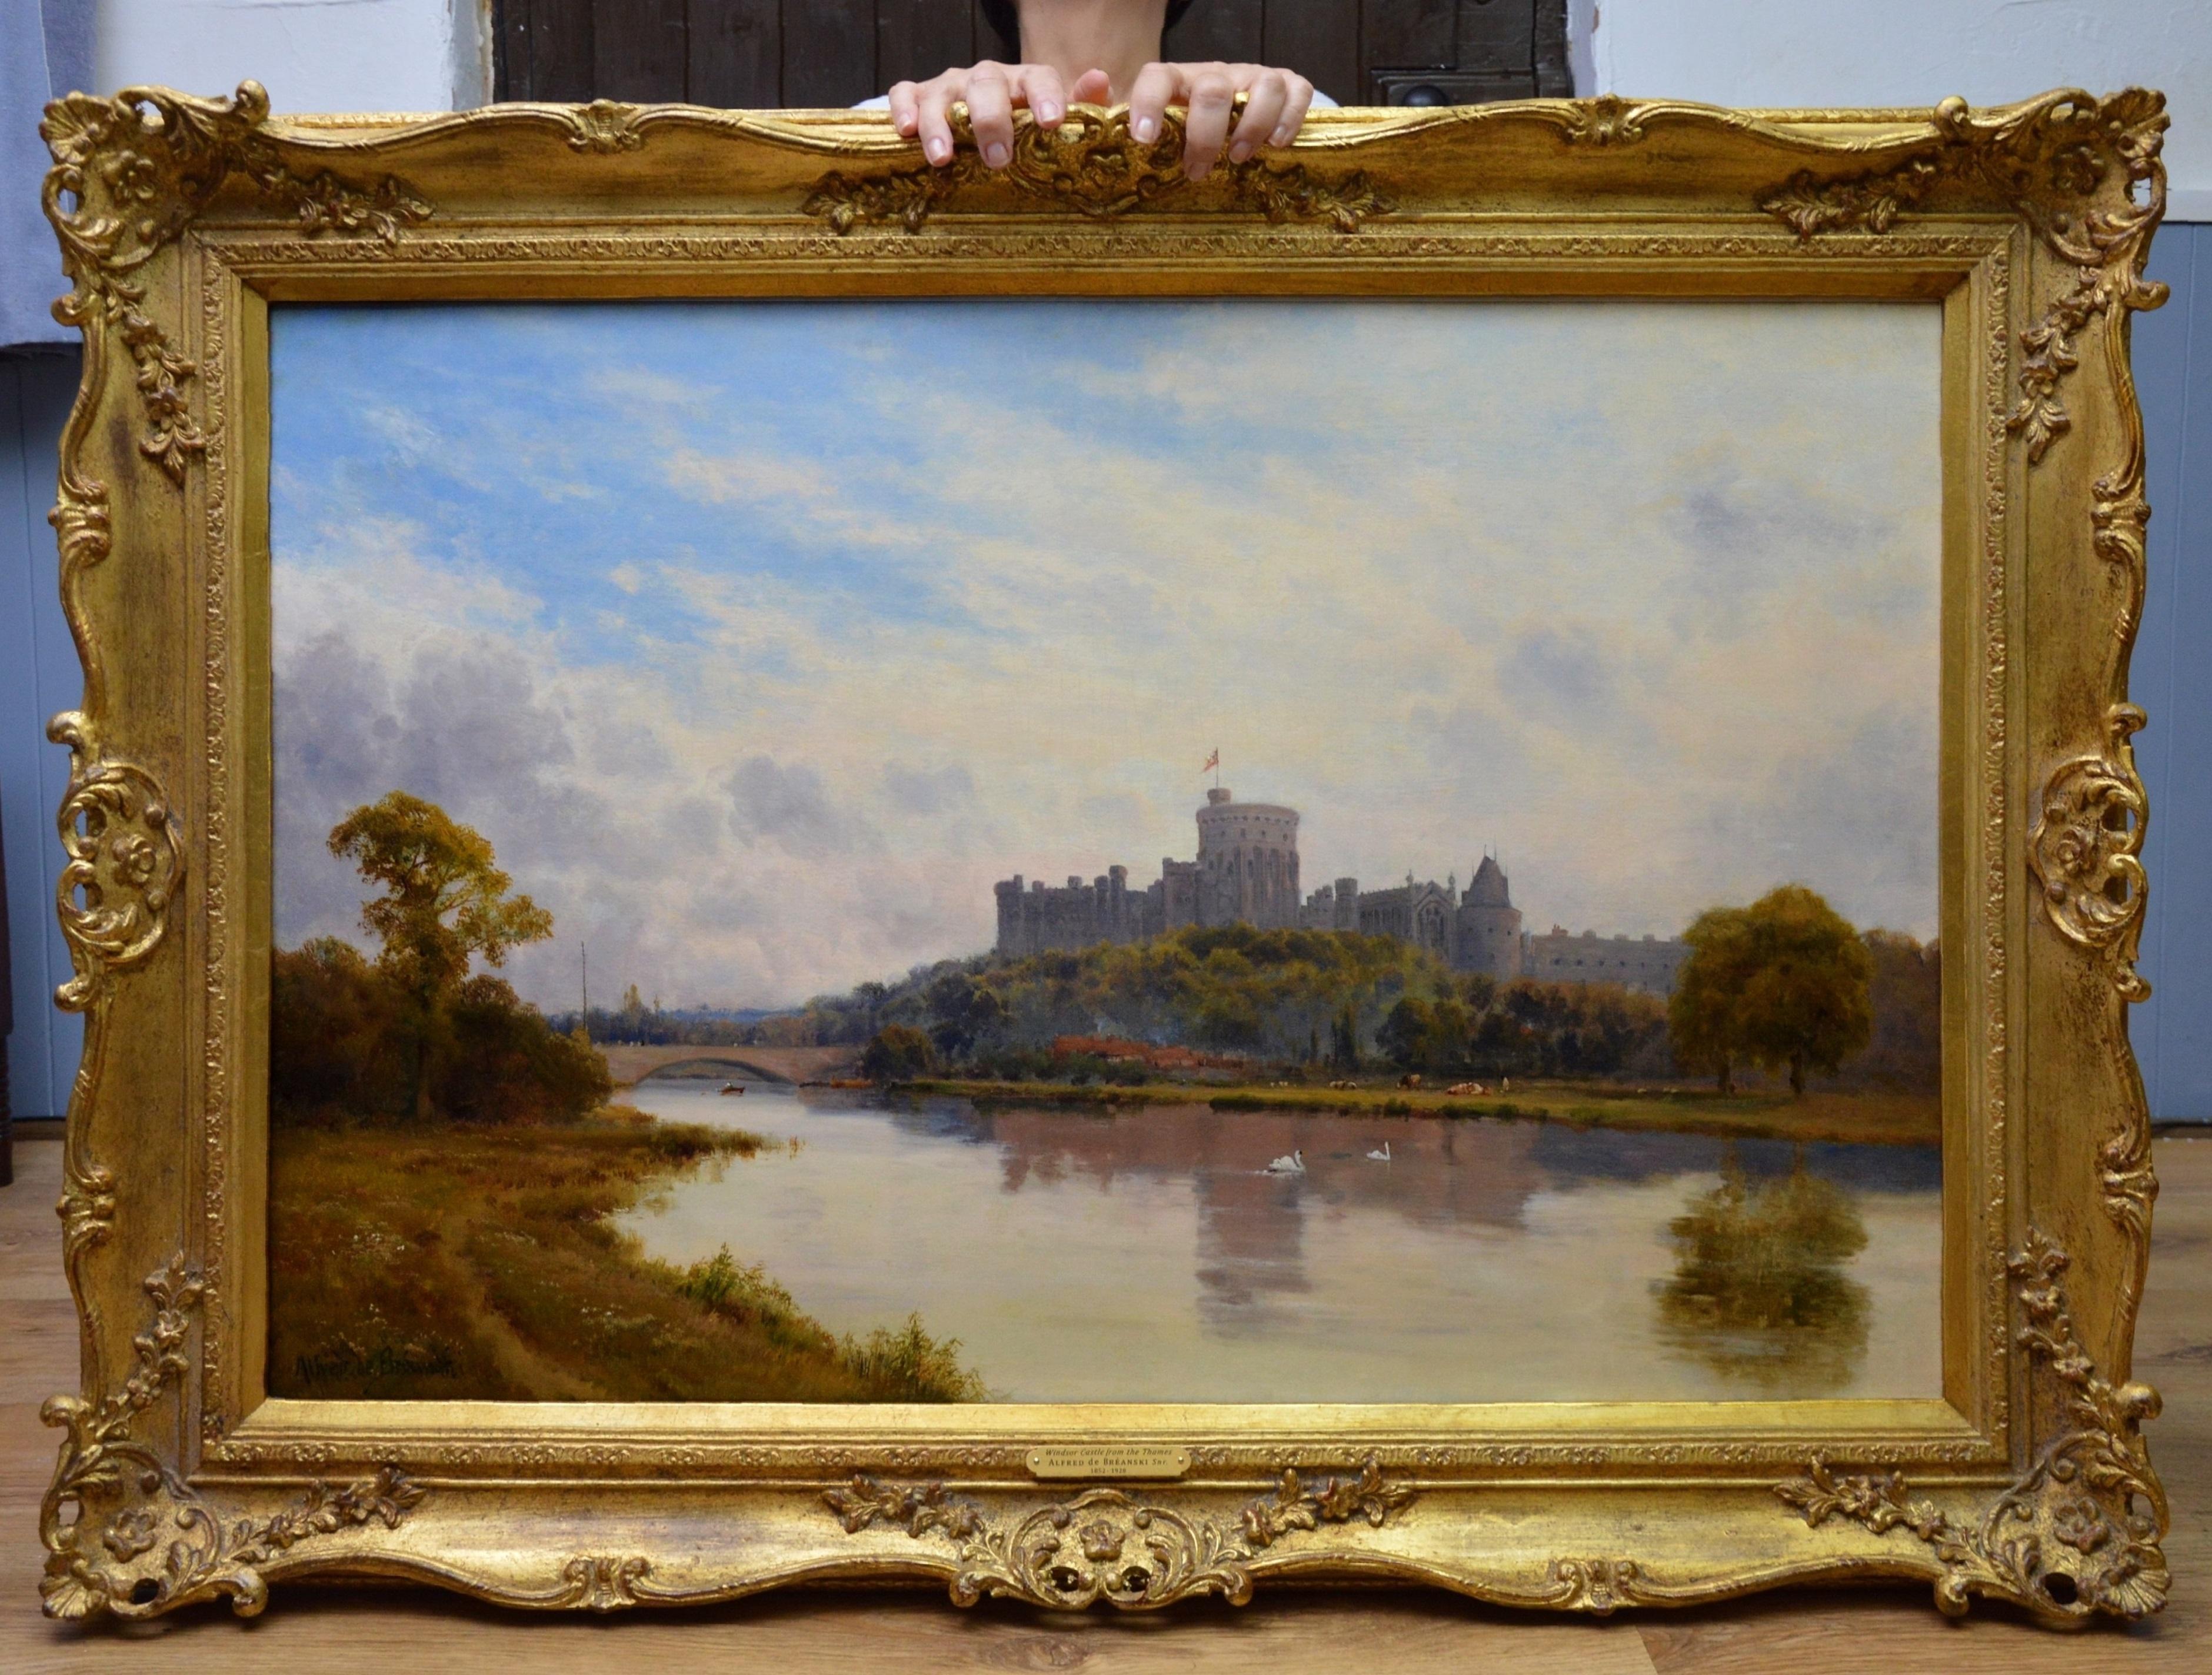 Windsor Castle from the Thames - 19th Century Royal Victorian River Landscape - Painting by Alfred de Breanski Sr.